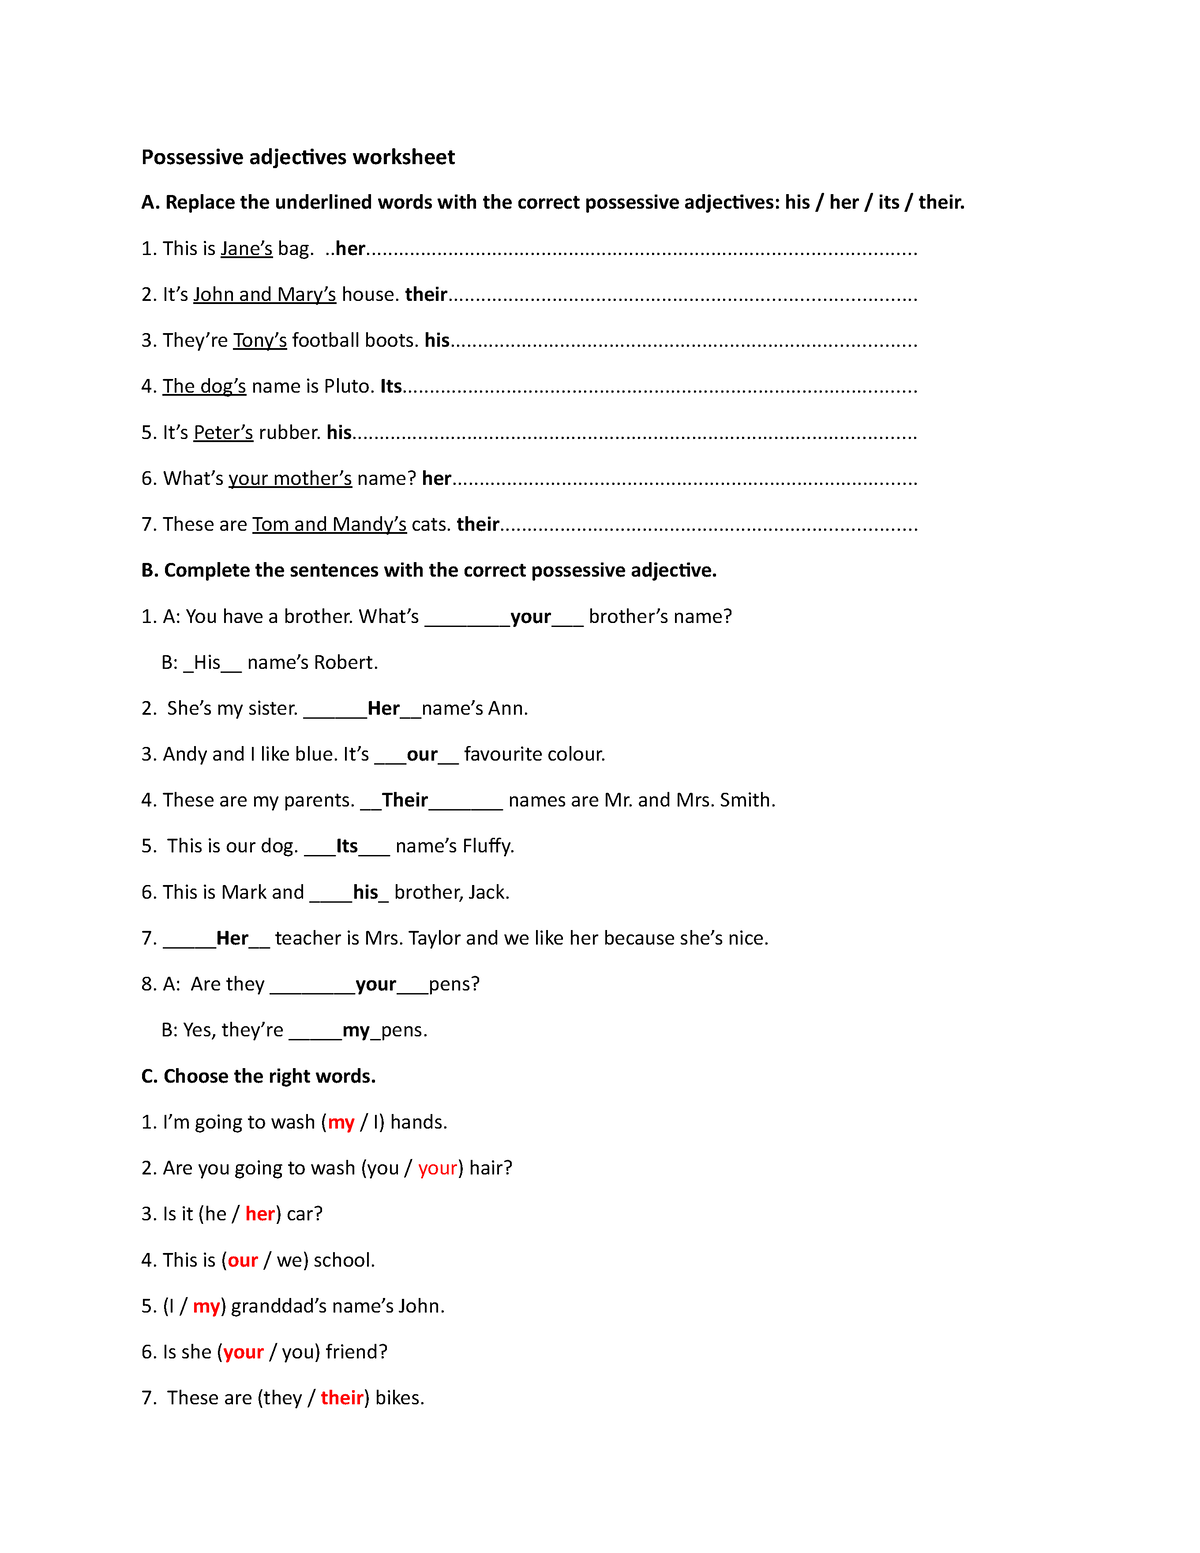 Possessive adjectives worksheet - Replace the underlined words with the ...